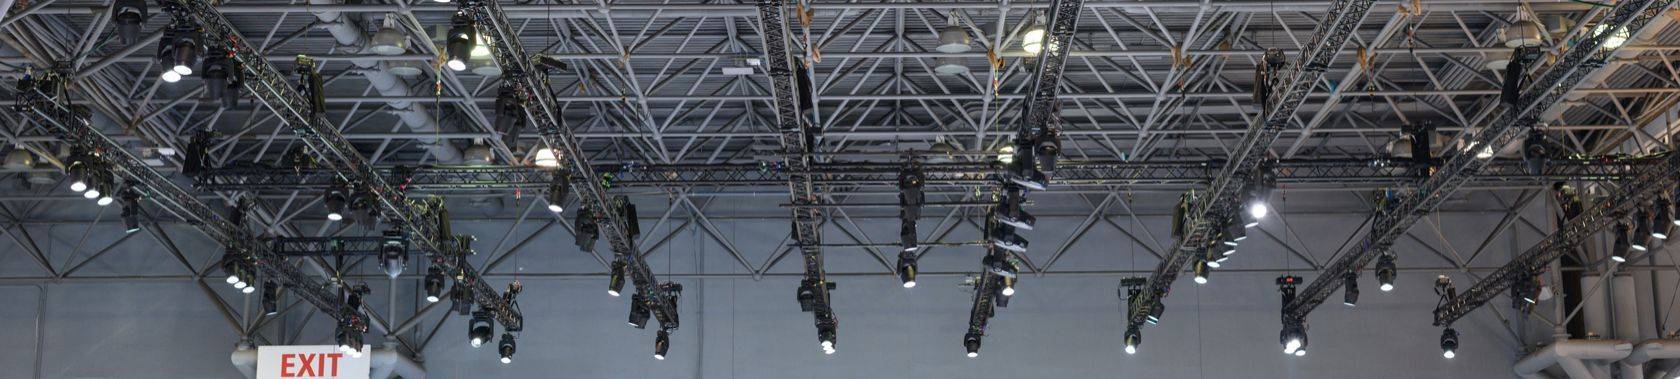 Creative Technology Expands Verto Truss Inventory